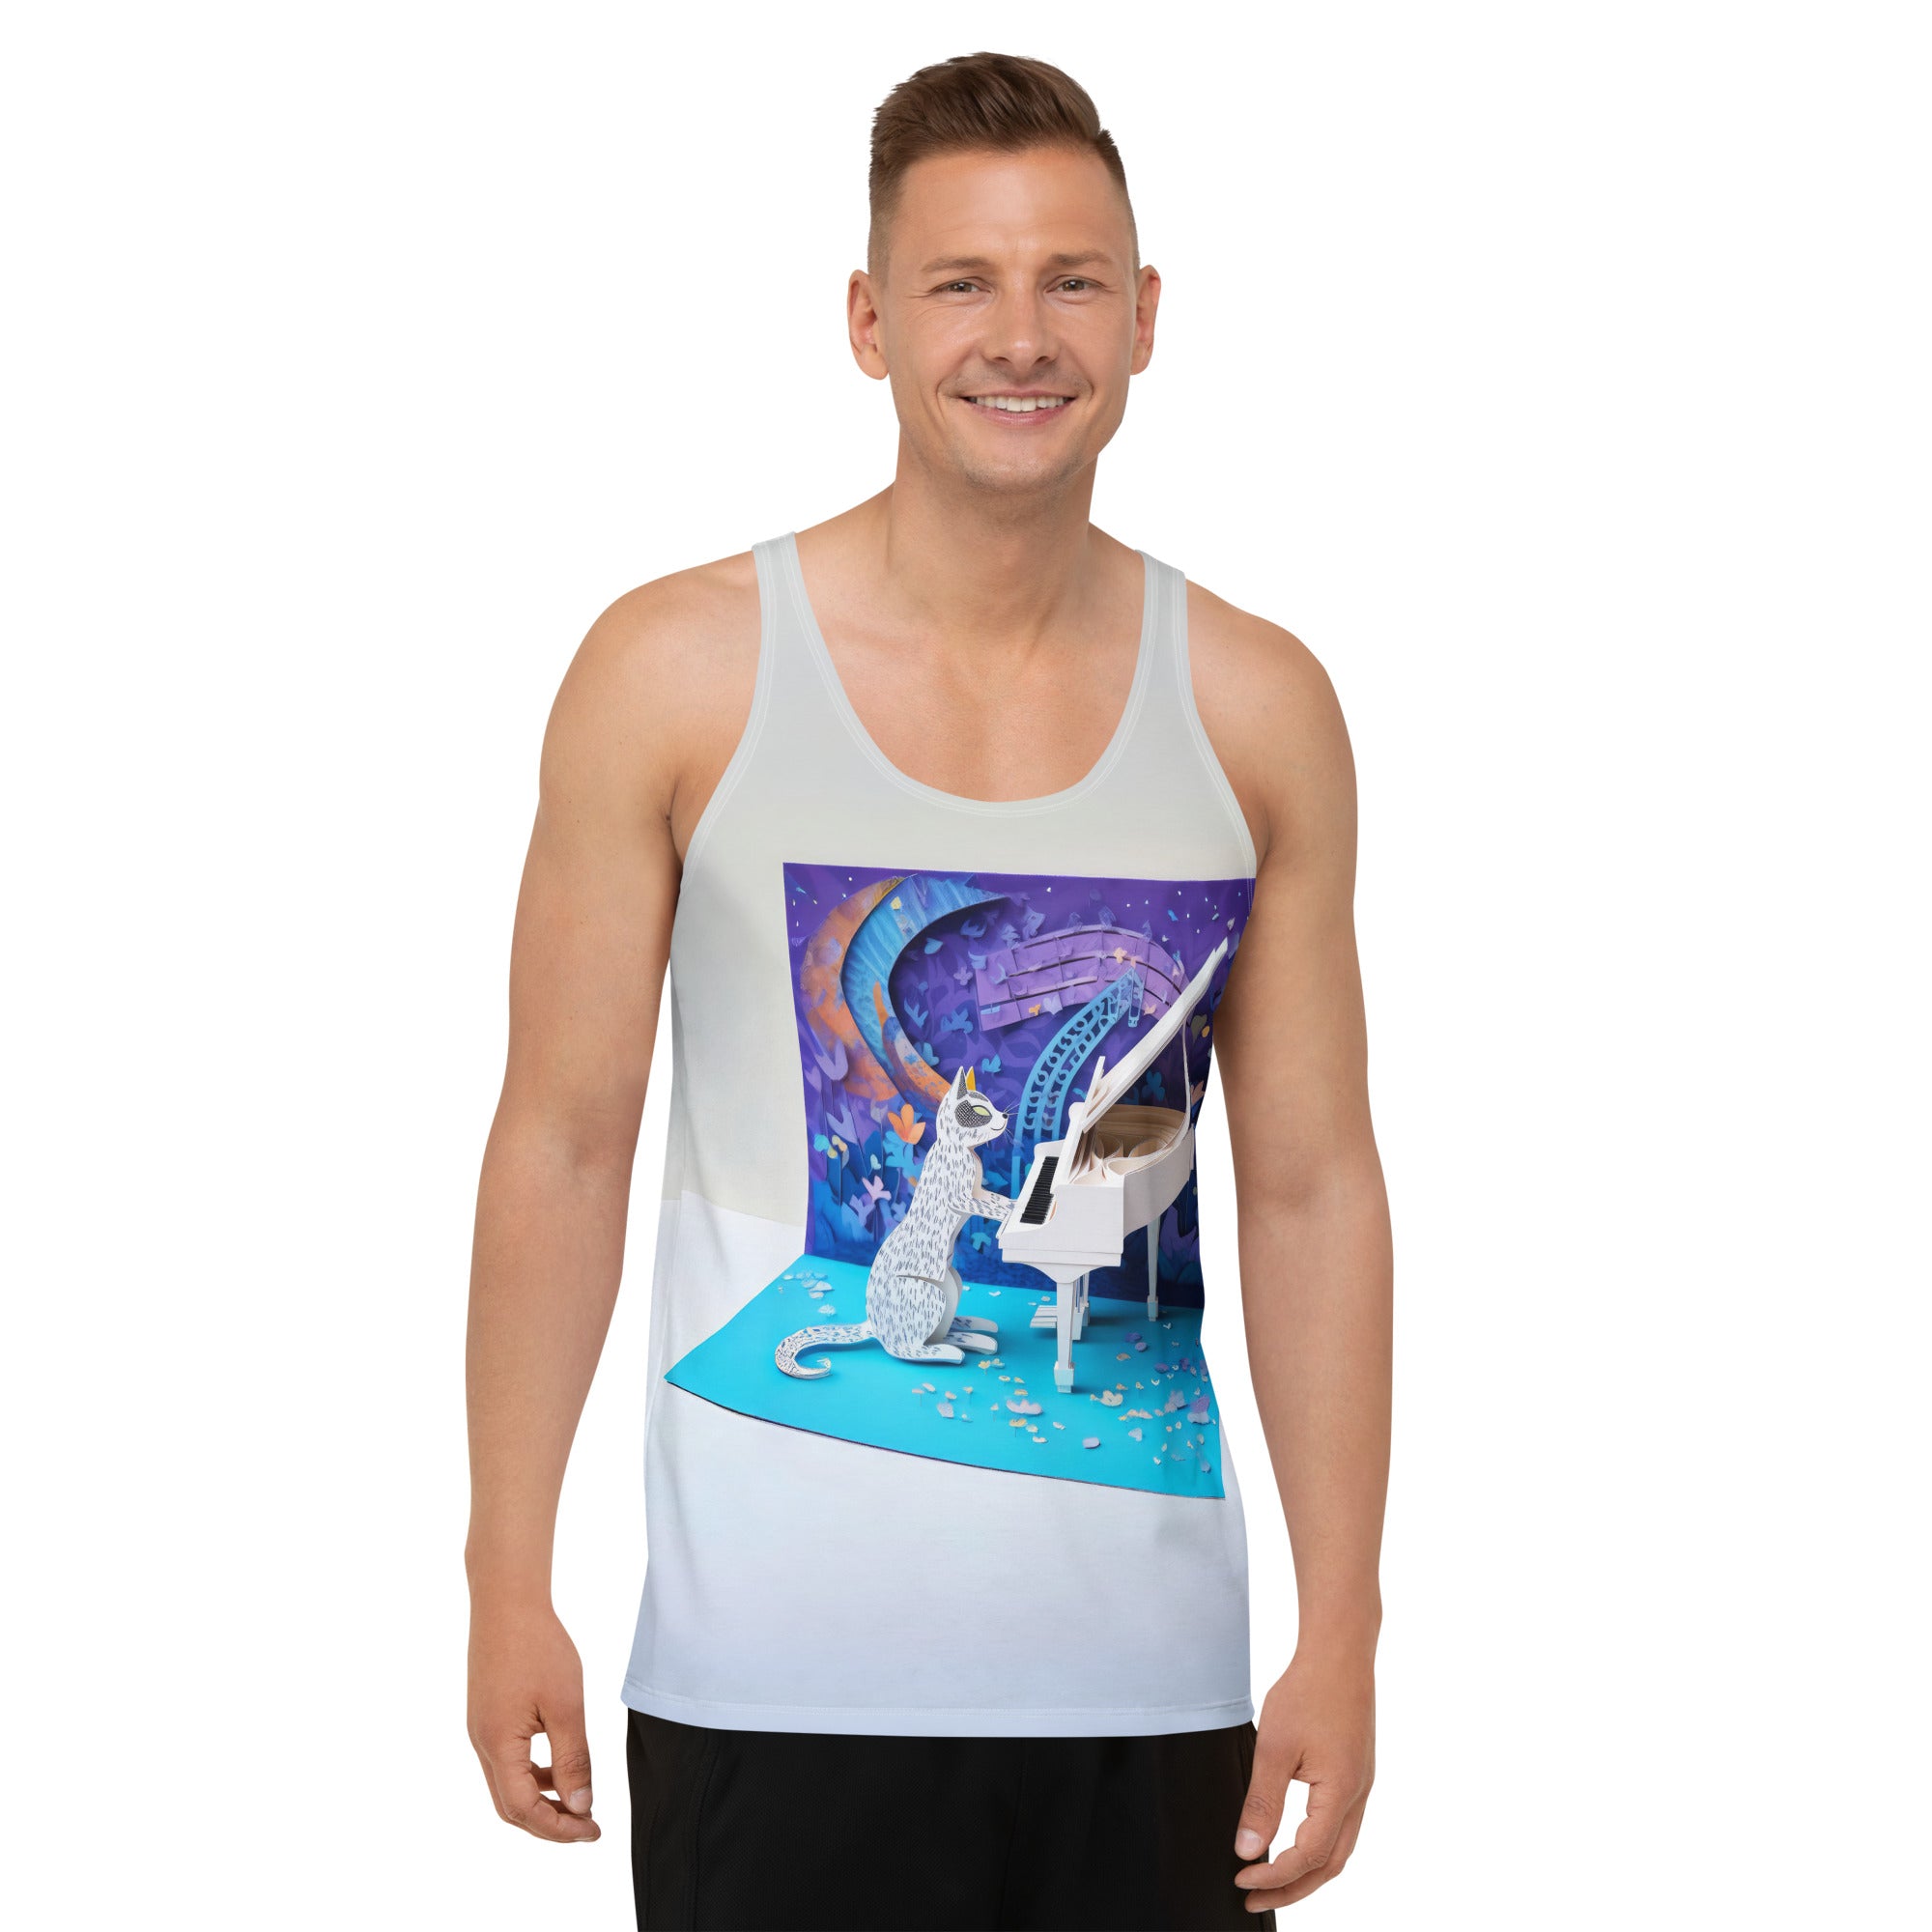 Stylish Origami Frog Leap tank top for men.